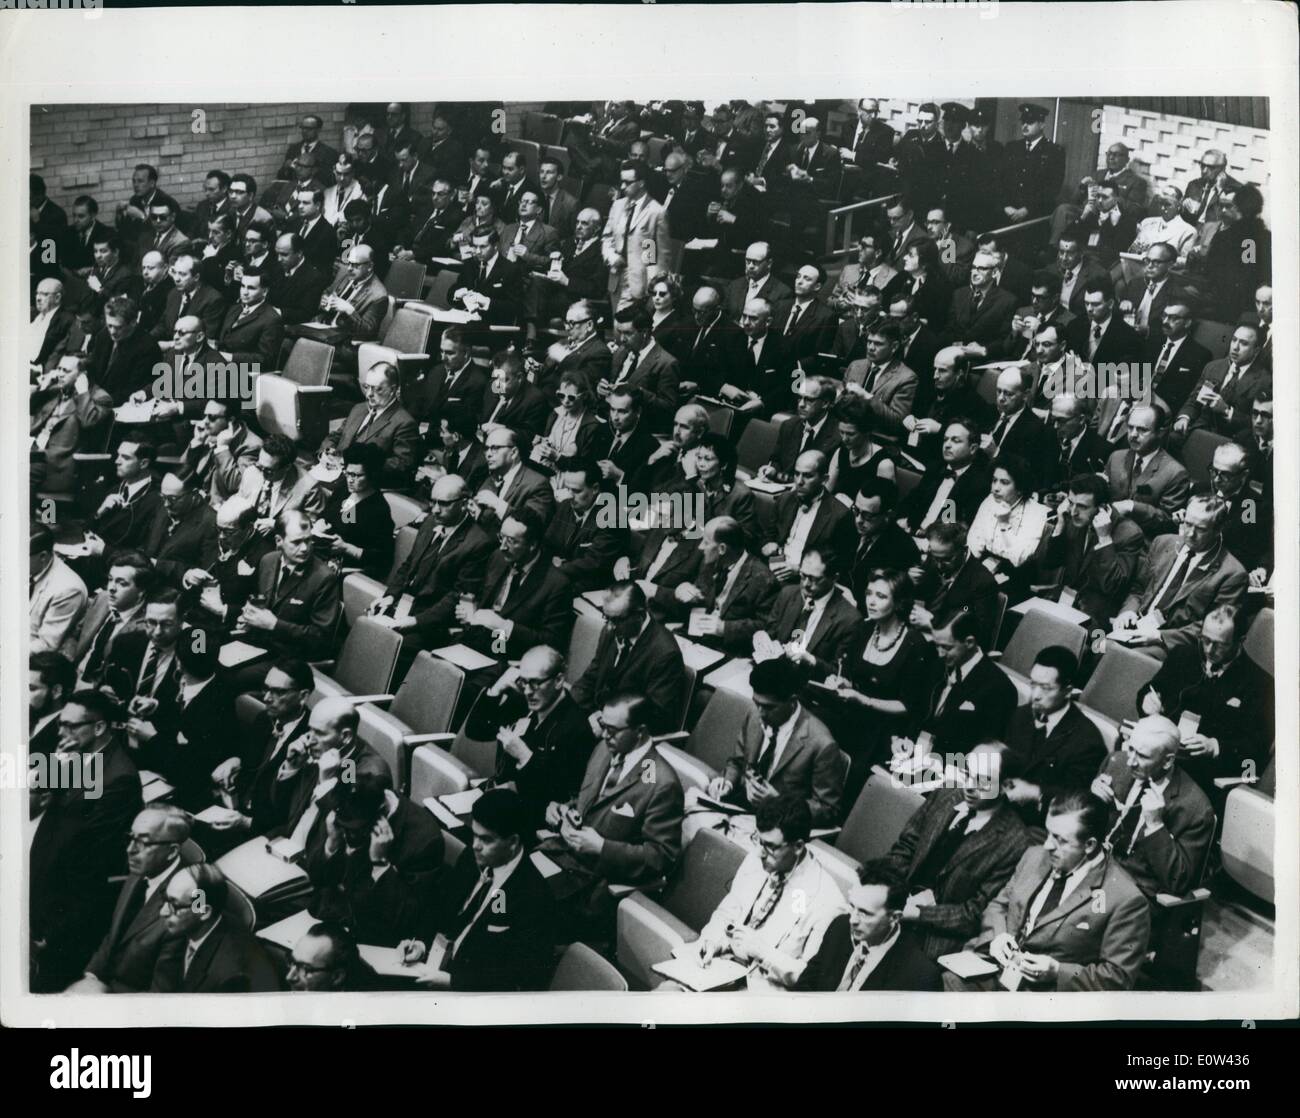 Apr. 04, 1961 - Trial of Adolf Eichmann Continues in Jerusalem: The Trial continues in Jerusalem of Adolf Eichmann - former Nazi S.S. Colonel - on charges of the mas murder of Jews in Nazi concentration camps. of the mass murder of jews in Nazi concentration camps. Photo shows General view showing onlookers as they listen the proceedings - of the trial. Stock Photo